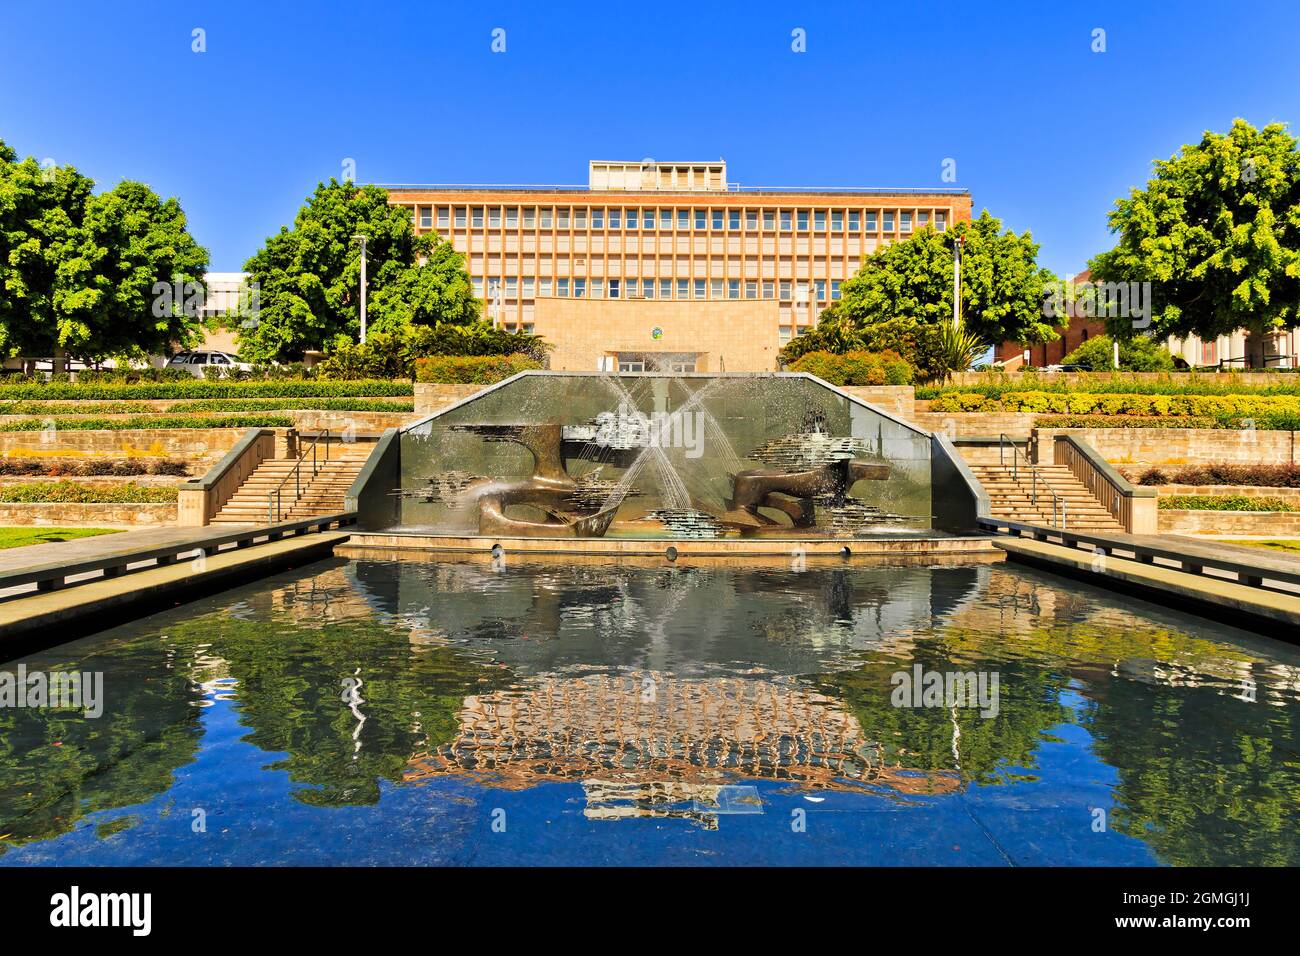 Public building of war memorial in downtown of Newcastle city with standing pool and fountain, NSW, Australia. Stock Photo